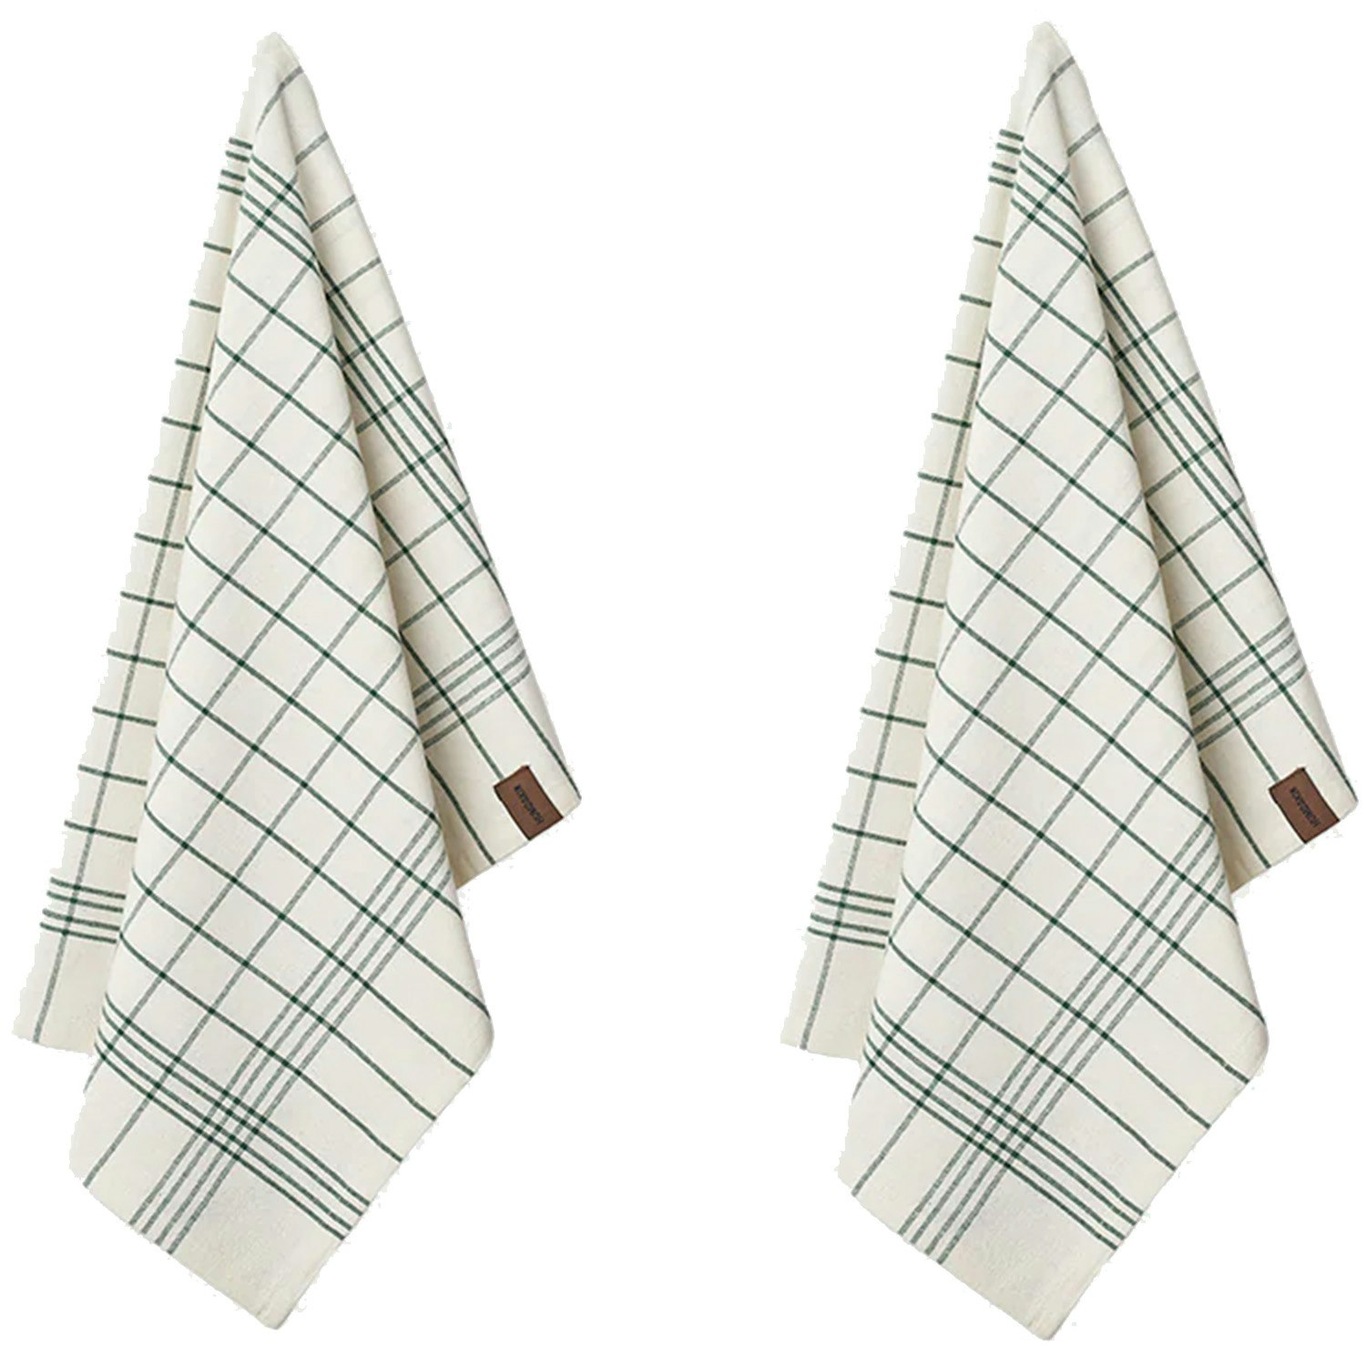 2-pack Christmas Kitchen Towel, Green